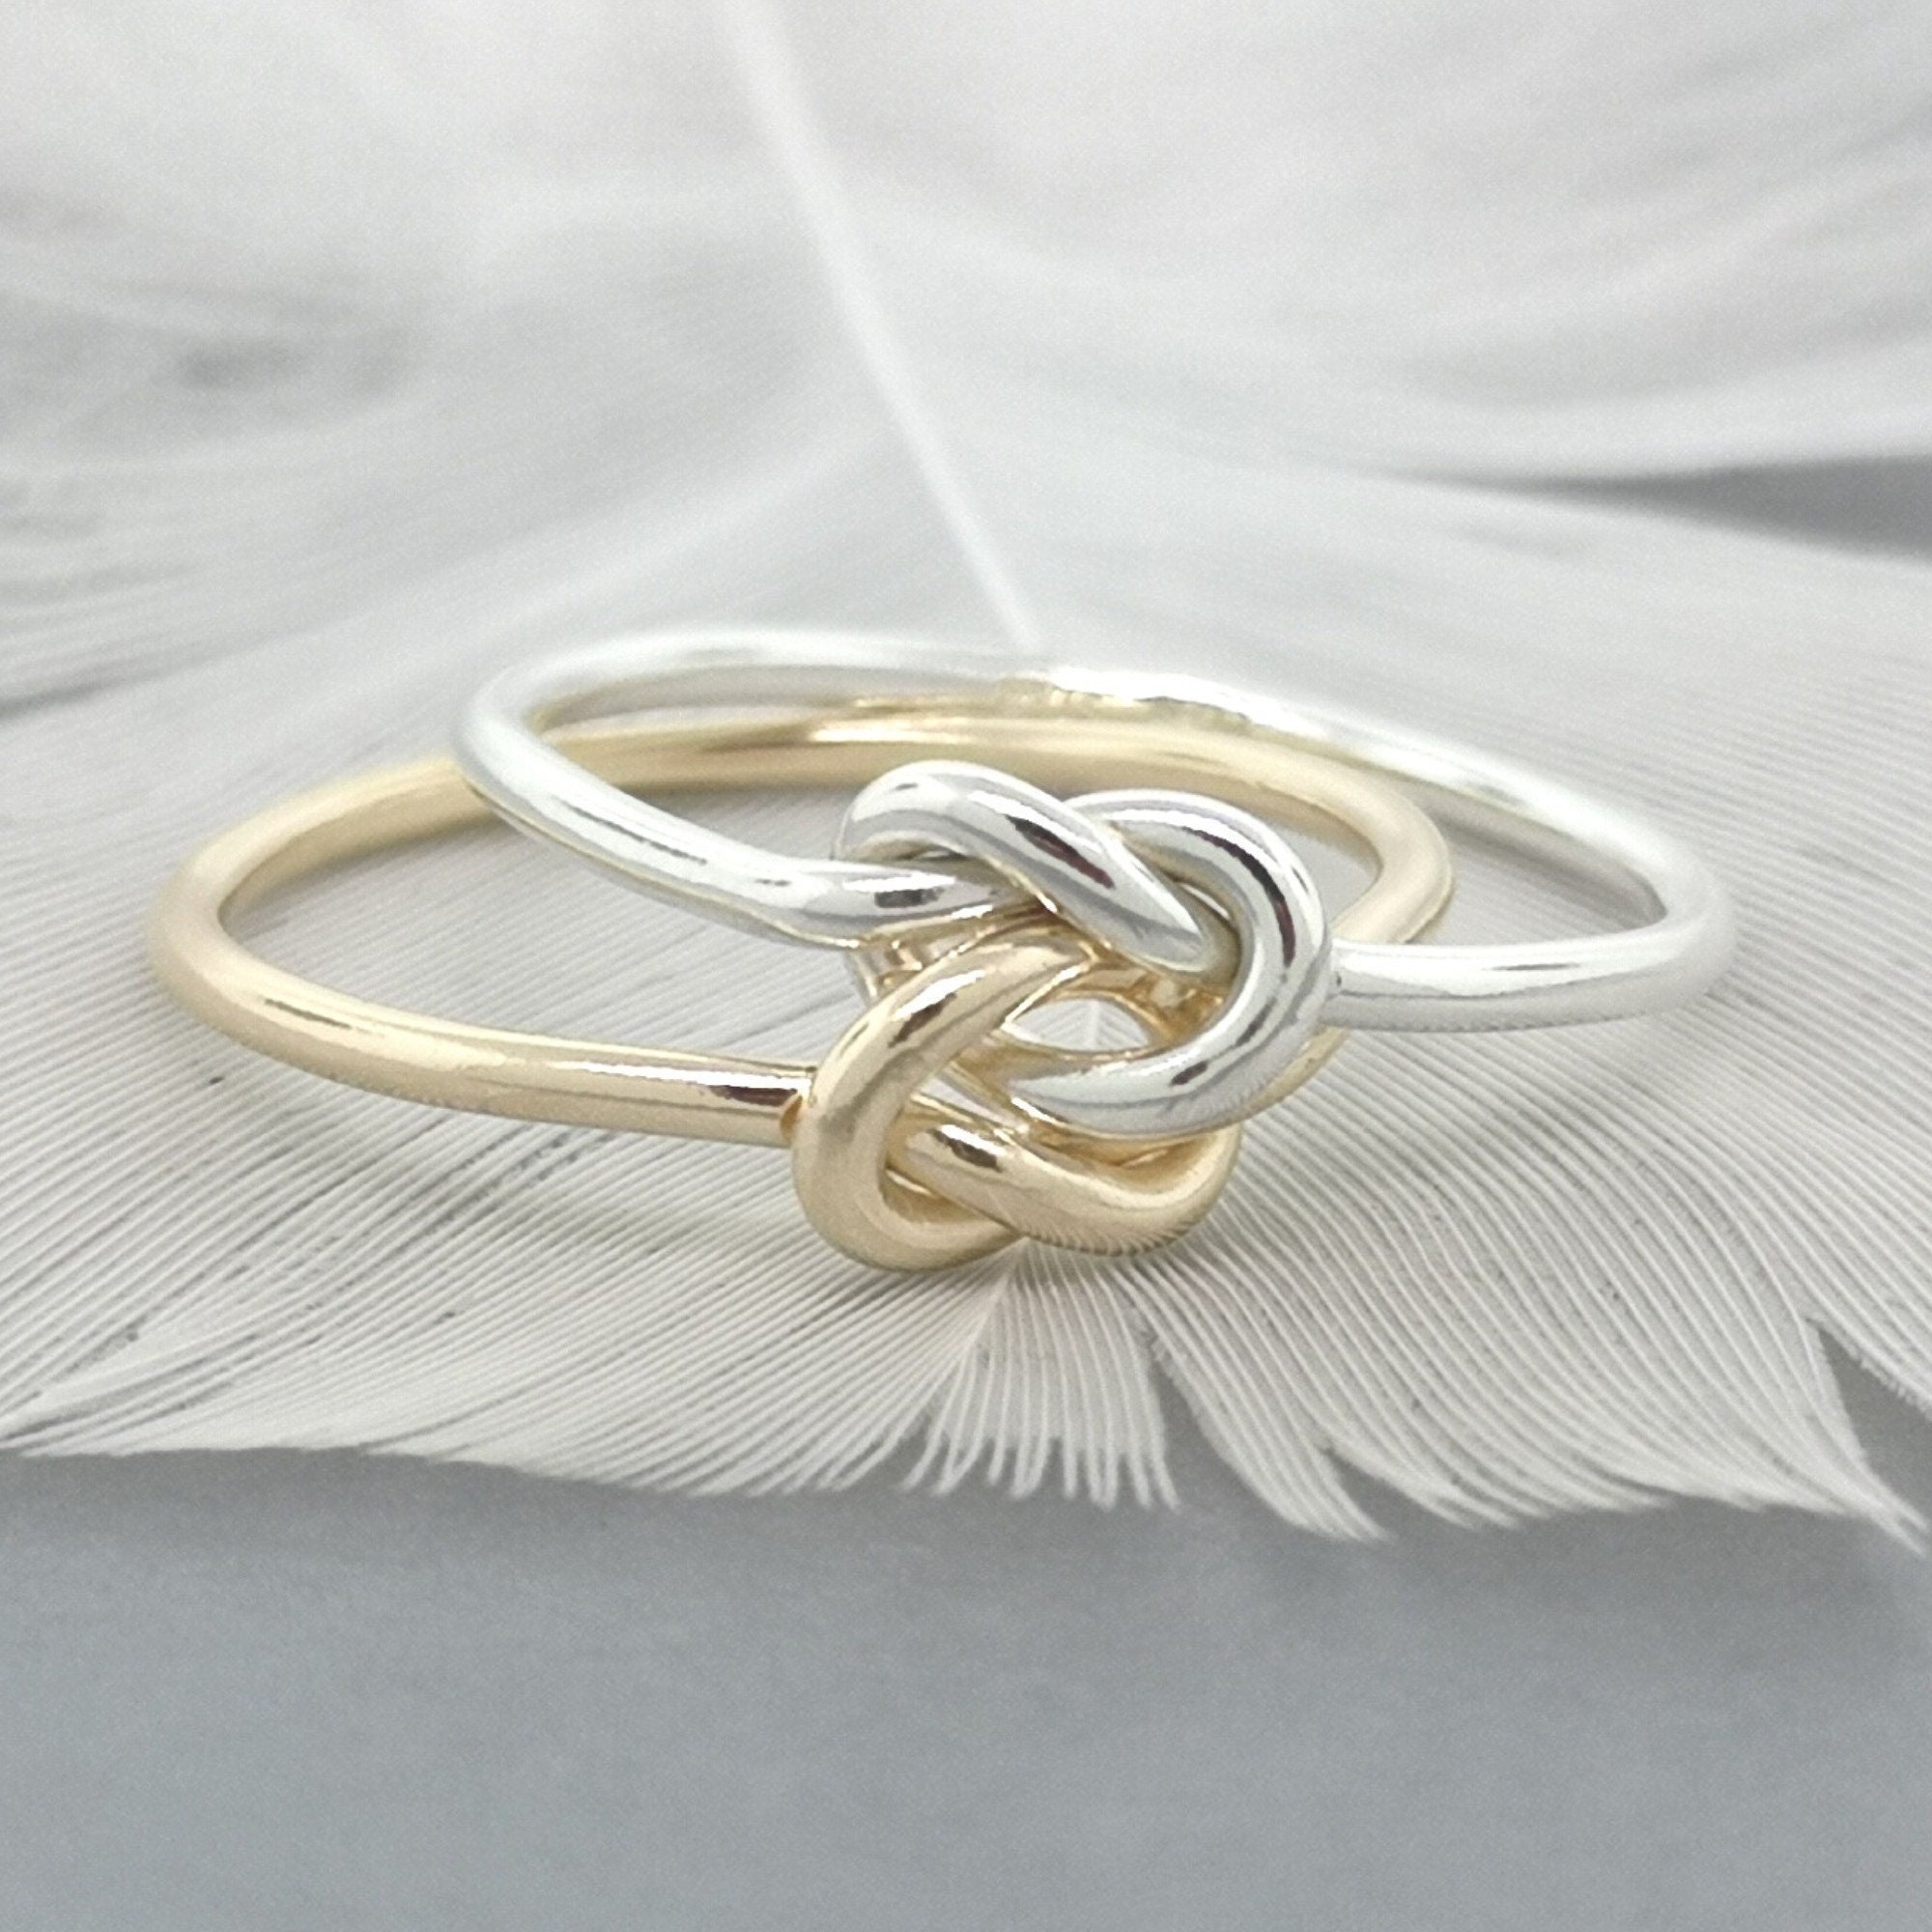 The Ancient and Mysterious Algerian Love Knot – SilverAndGold.com